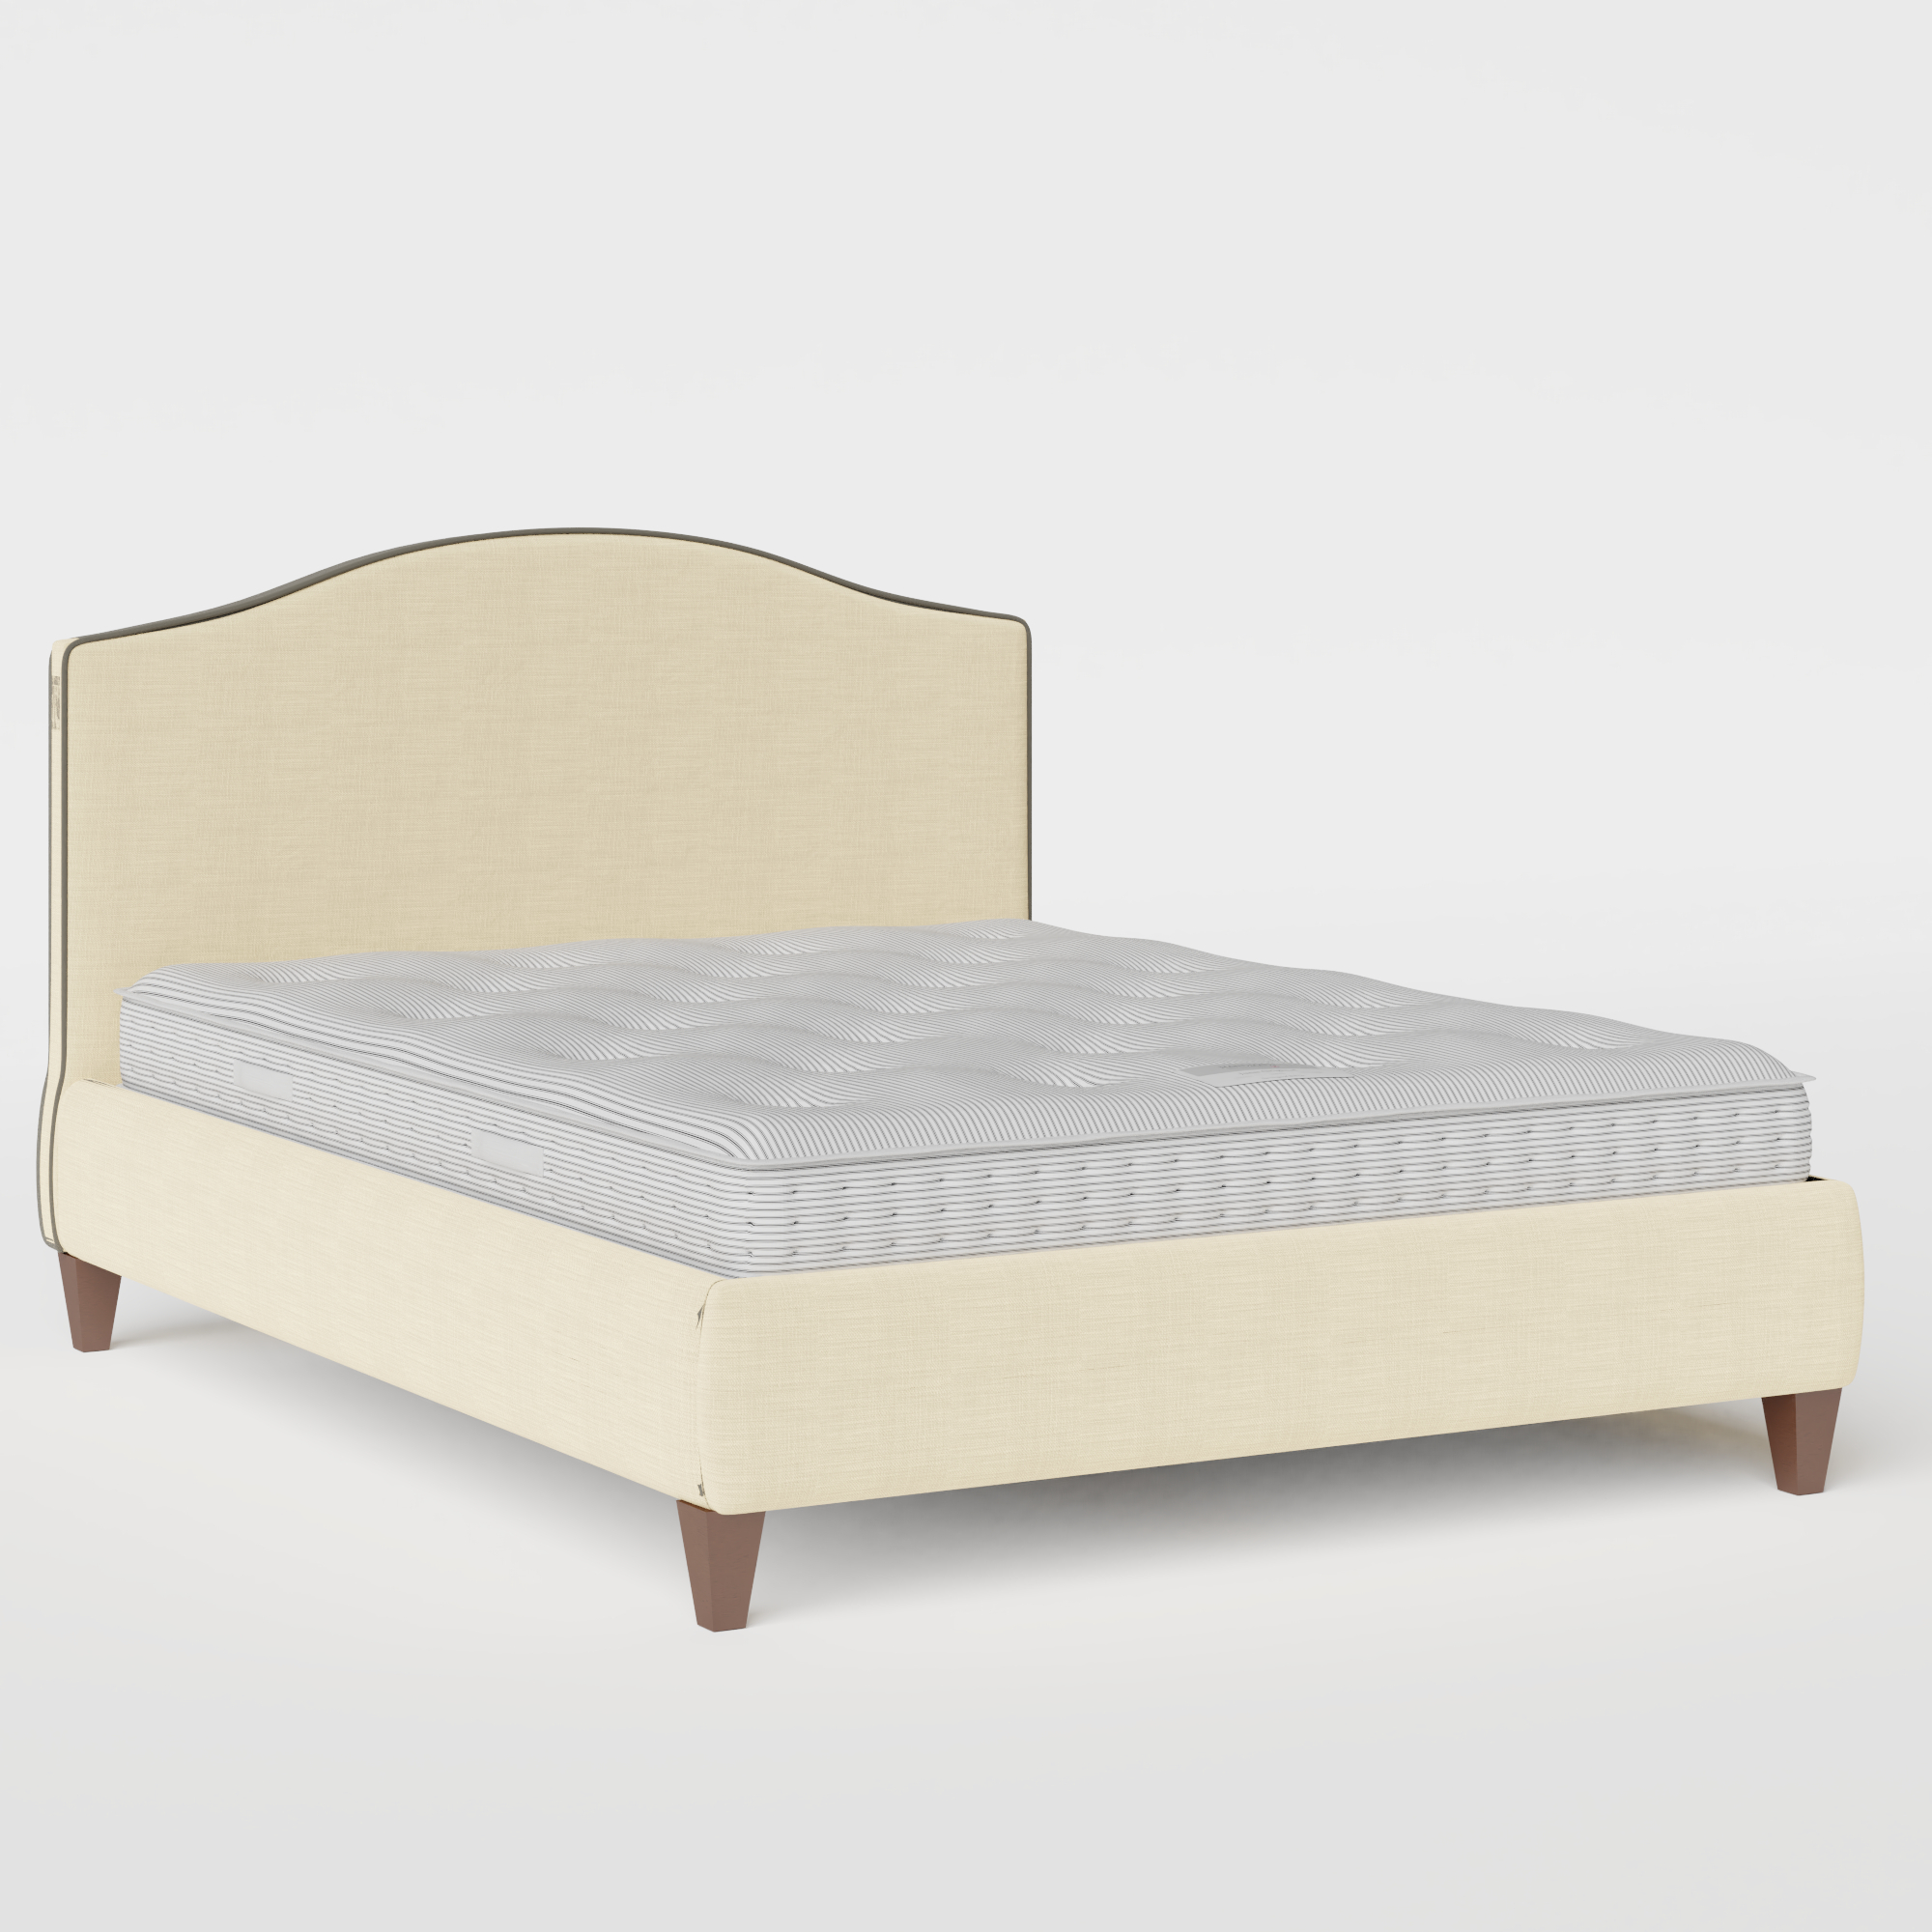 Daniella with Piping upholstered bed in natural fabric